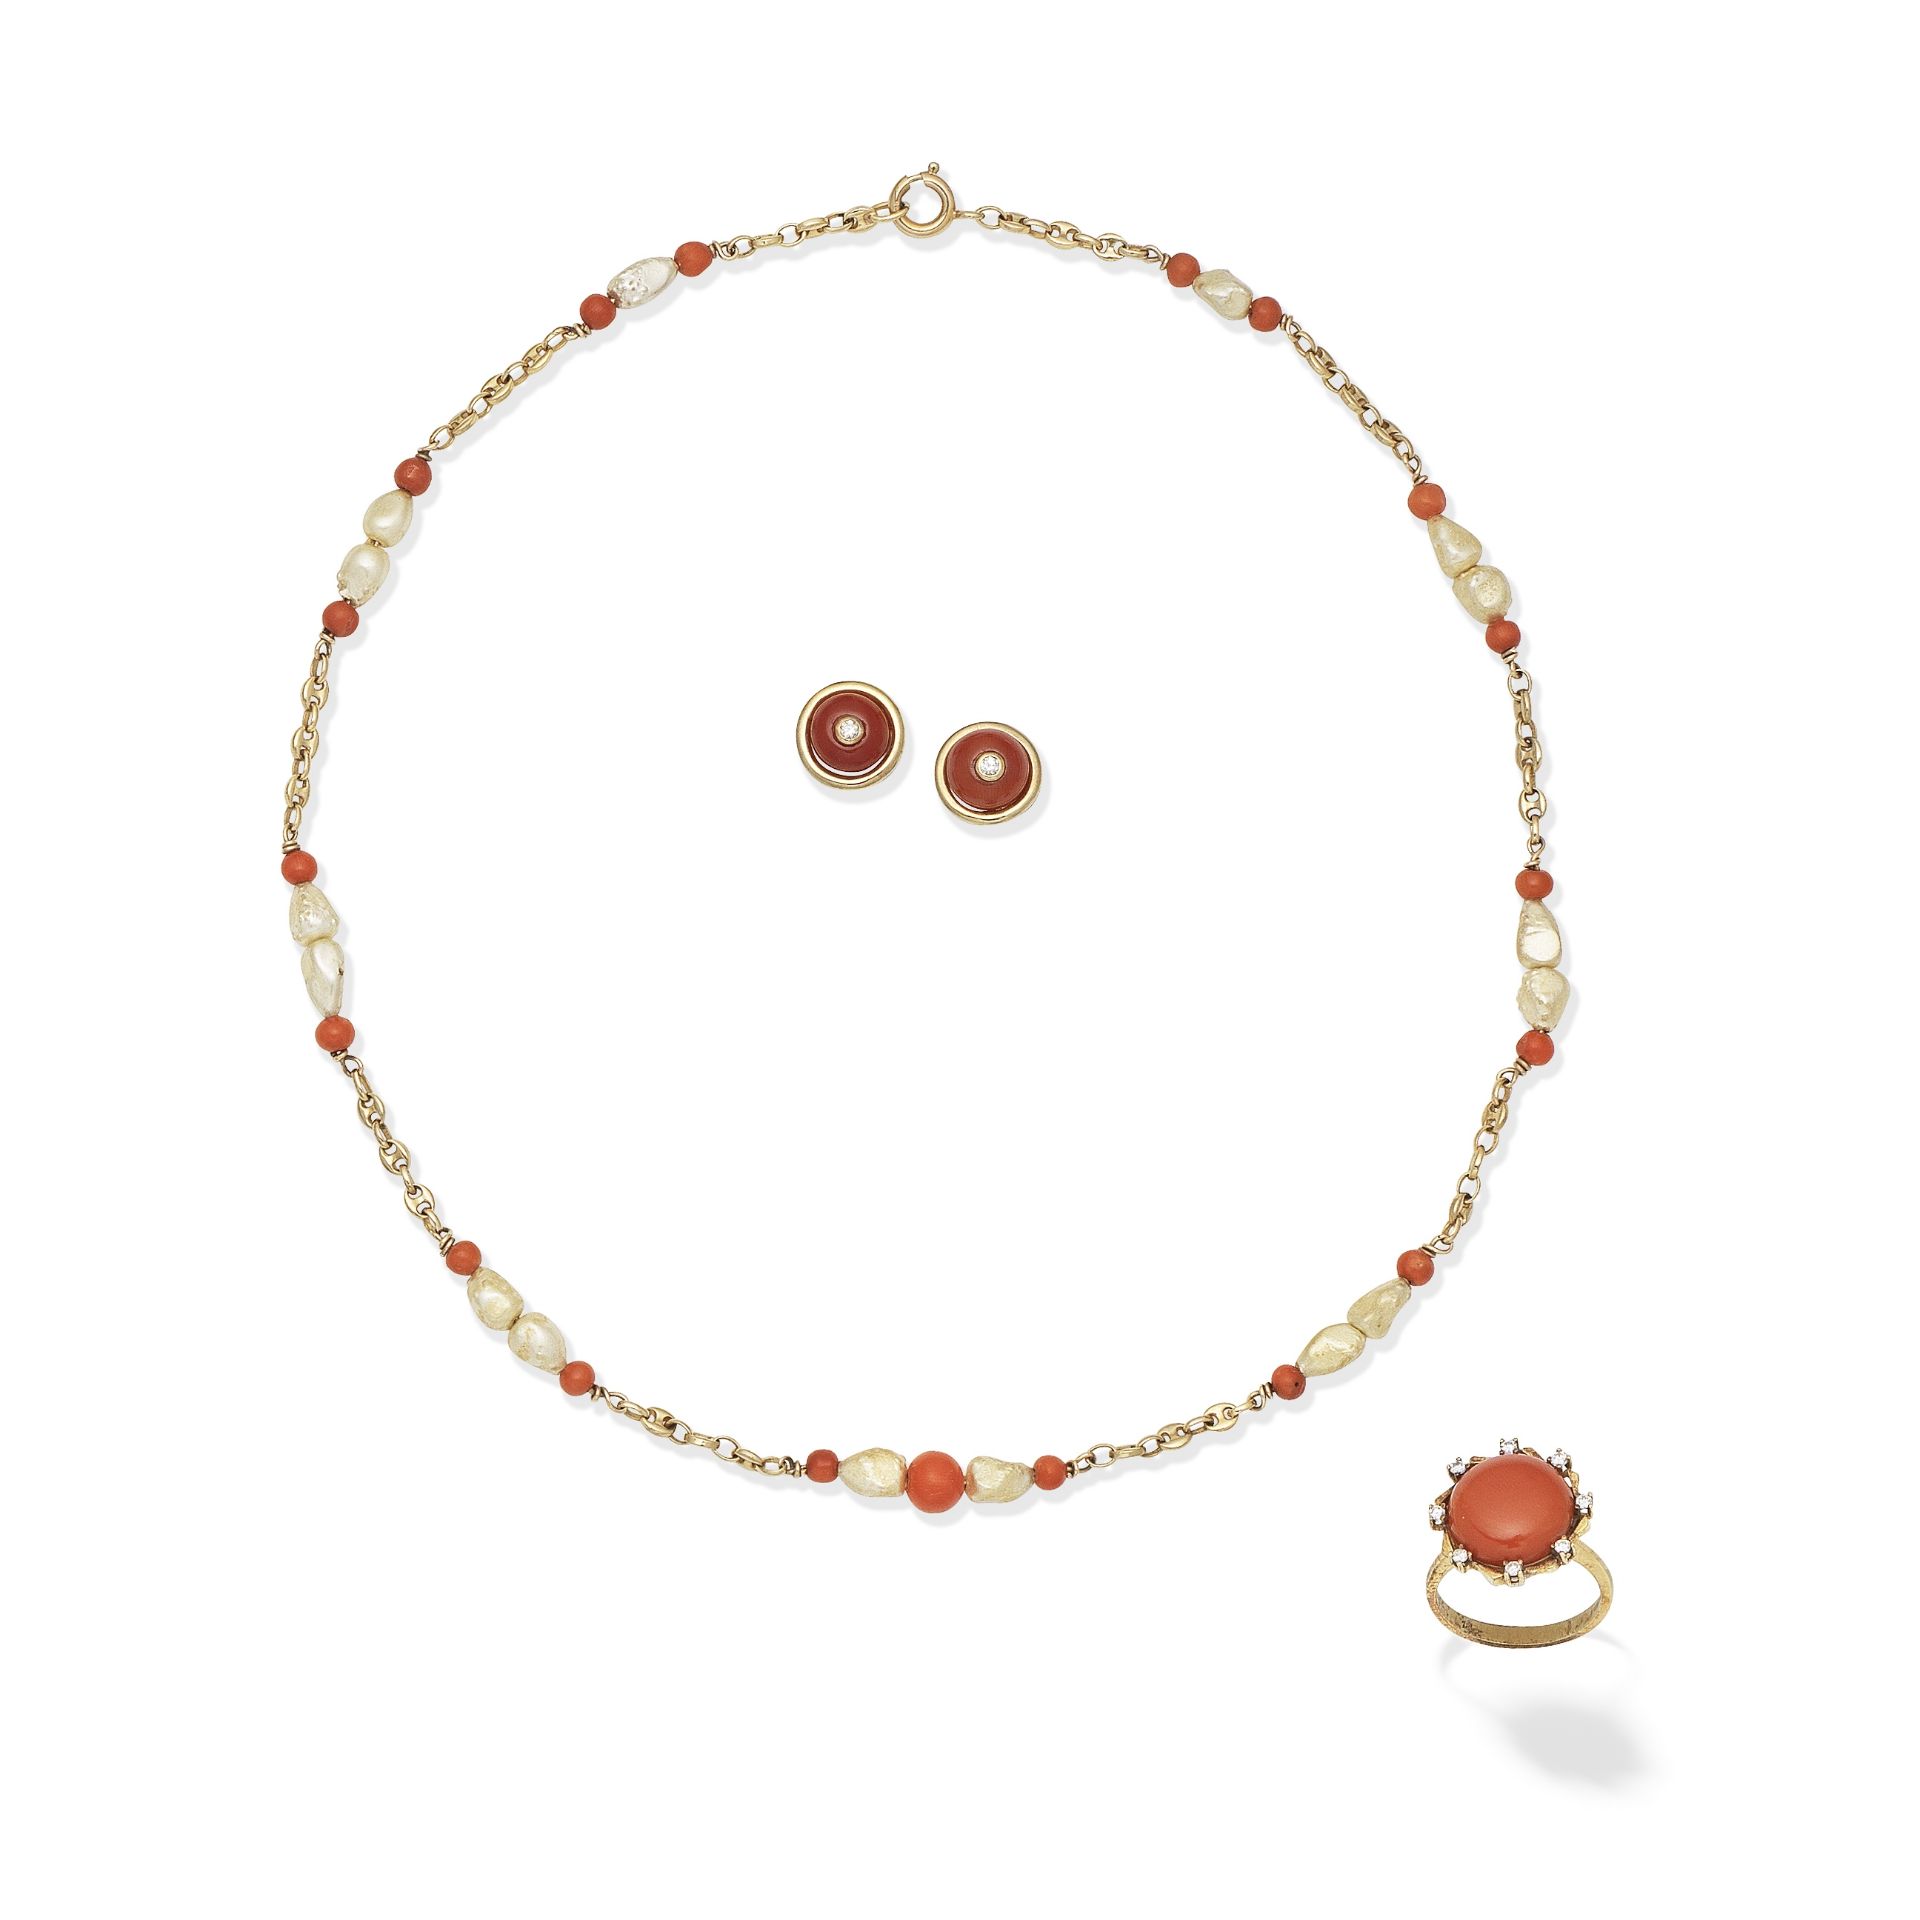 GROUP OF CORAL JEWELLERY